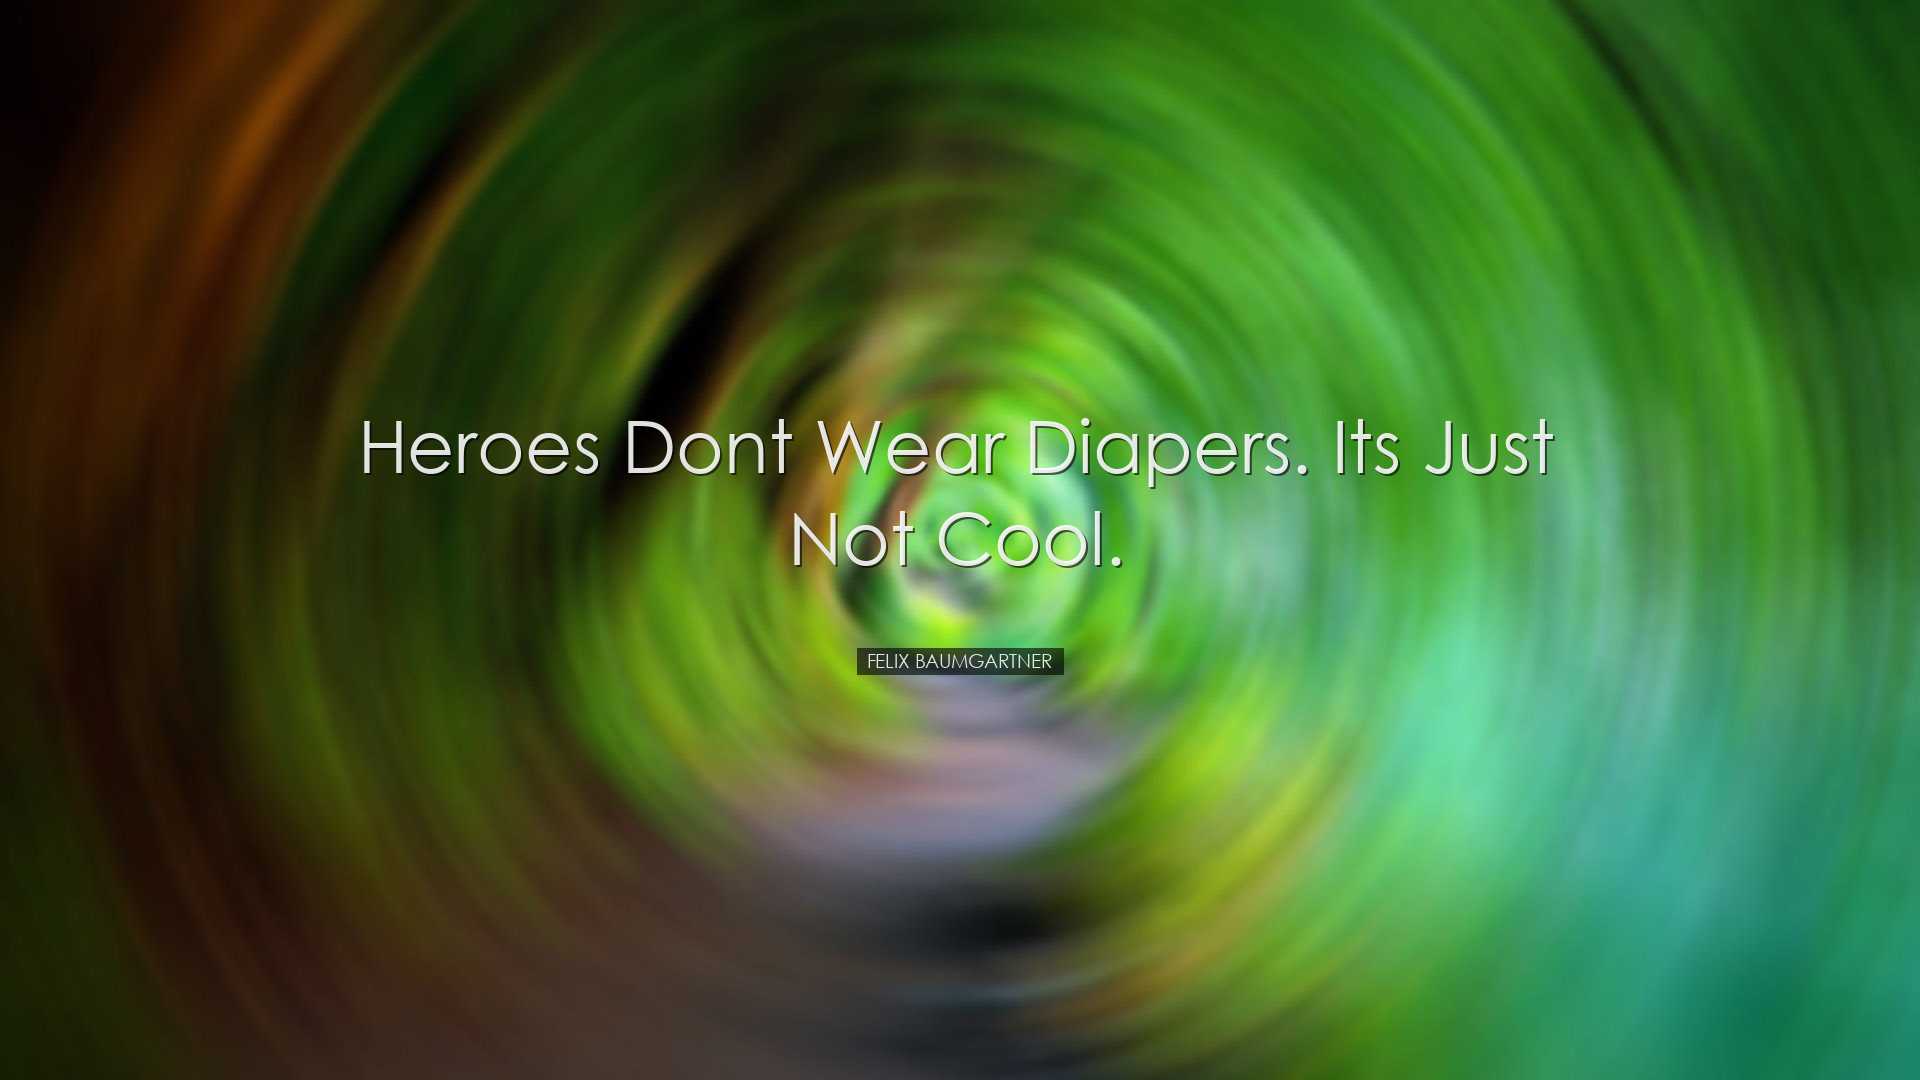 Heroes dont wear diapers. Its just not cool. - Felix Baumgartner